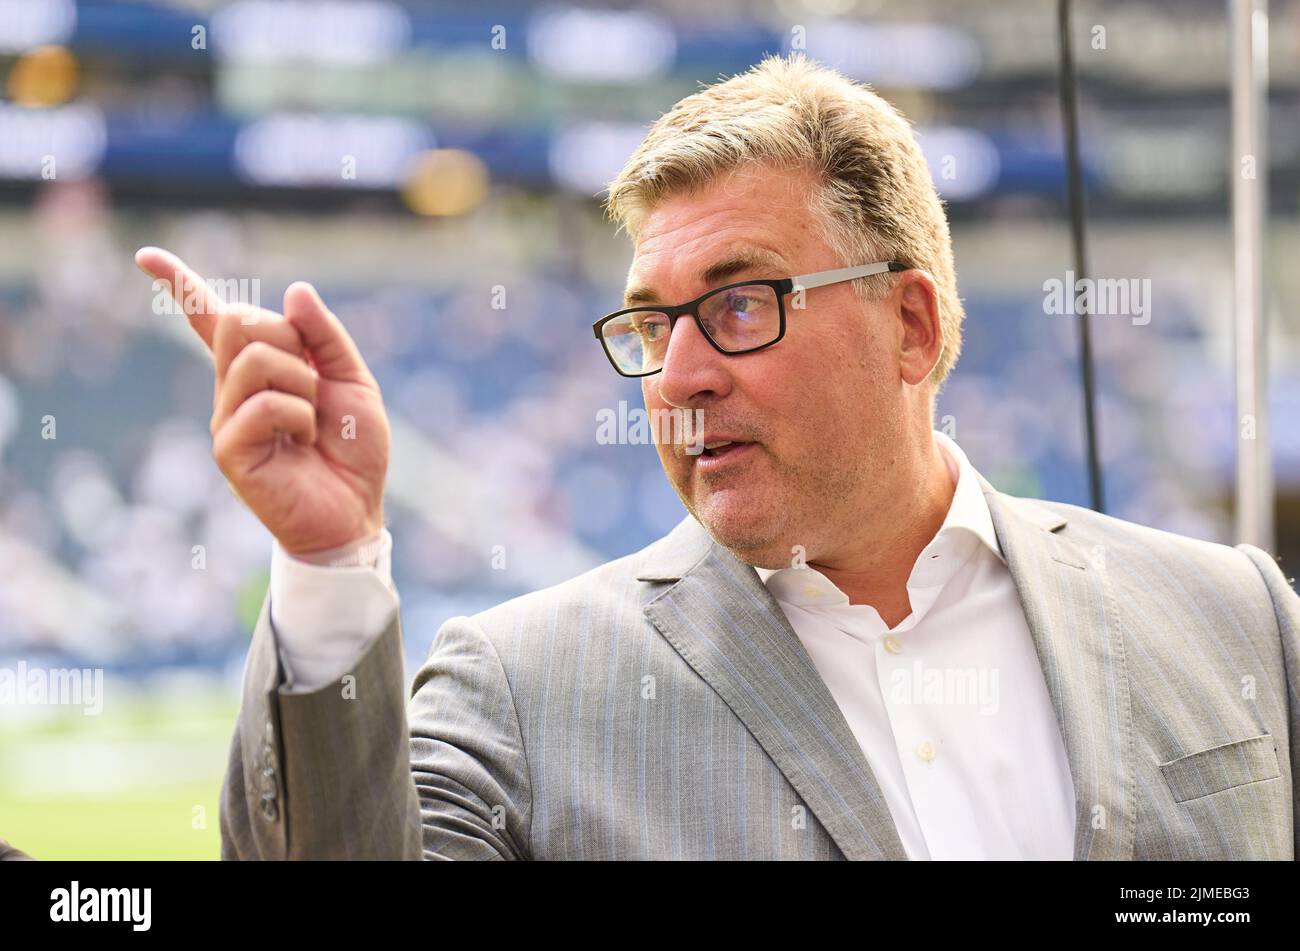 Axel HELLMANN, Vorstand FRA in the match EINTRACHT FRANKFURT - FC BAYERN MÜNCHEN  1.German Football League on Aug 05, 2022 in Frankfurt, Germany. Season 2022/2023, matchday 1, 1.Bundesliga, FCB, Munich, 1.Spieltag © Peter Schatz / Alamy Live News    - DFL REGULATIONS PROHIBIT ANY USE OF PHOTOGRAPHS as IMAGE SEQUENCES and/or QUASI-VIDEO - Stock Photo